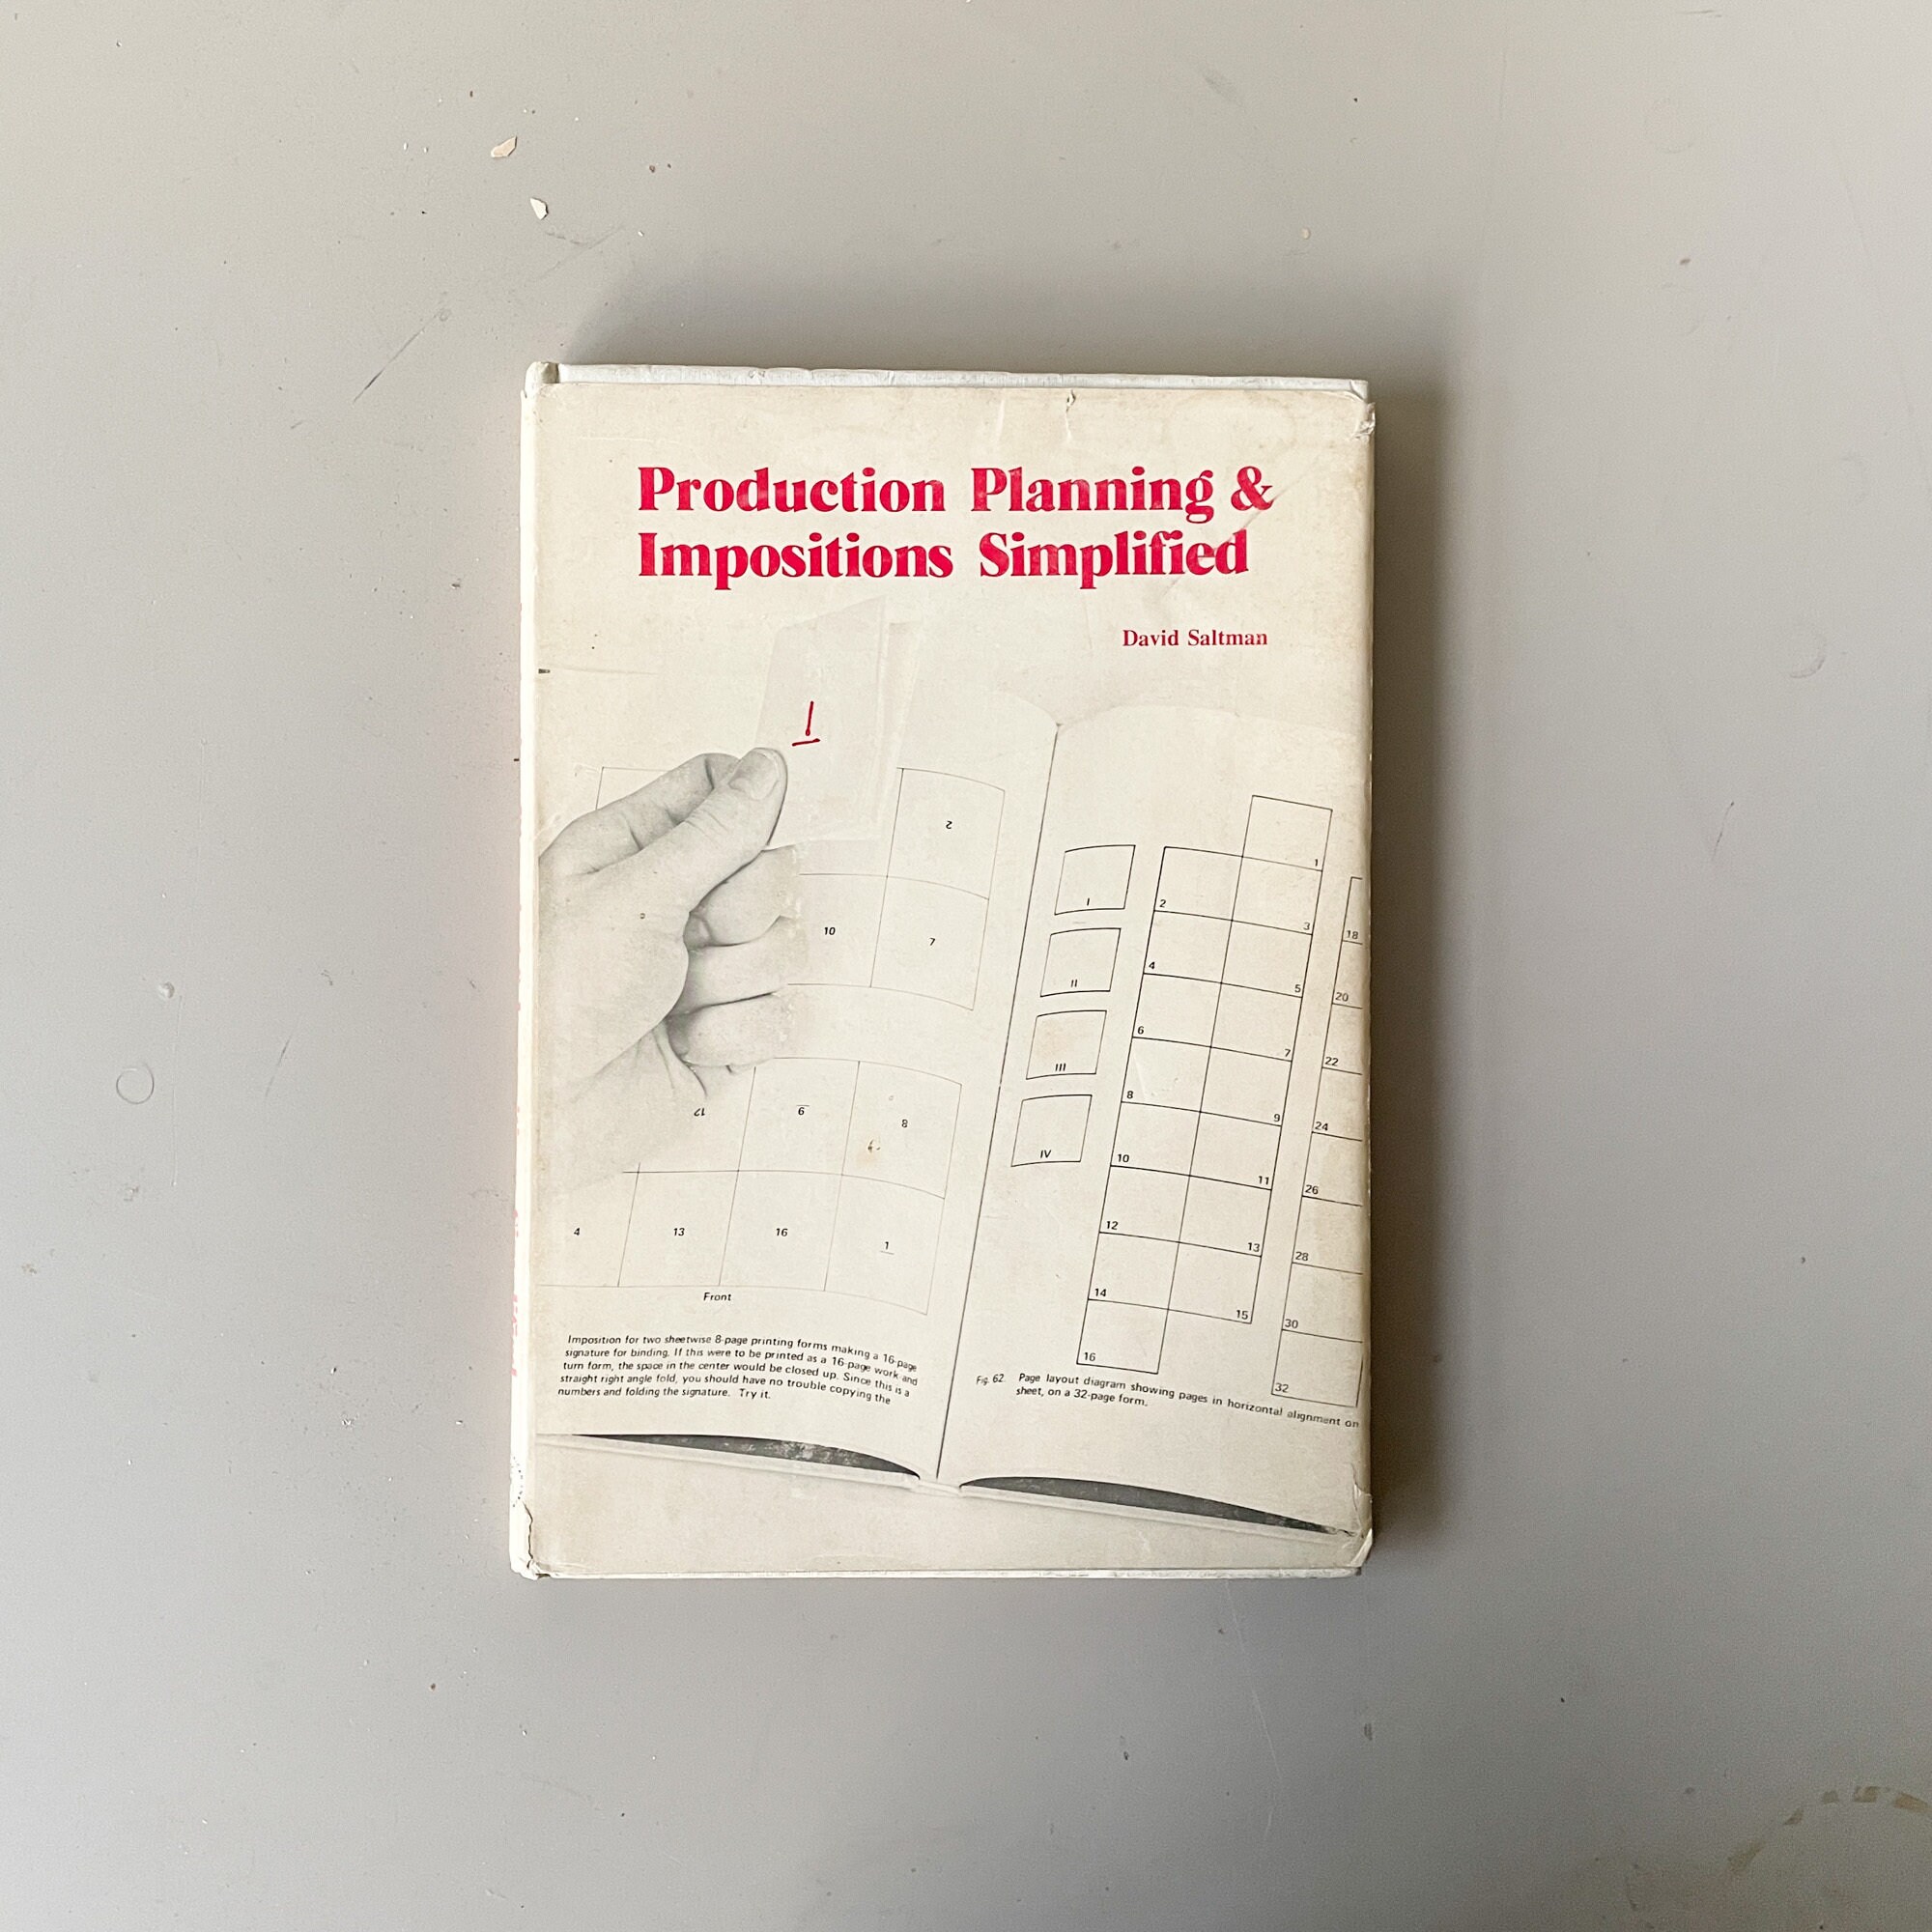 Production Planning & Impositions Simplified by David Saltman ...